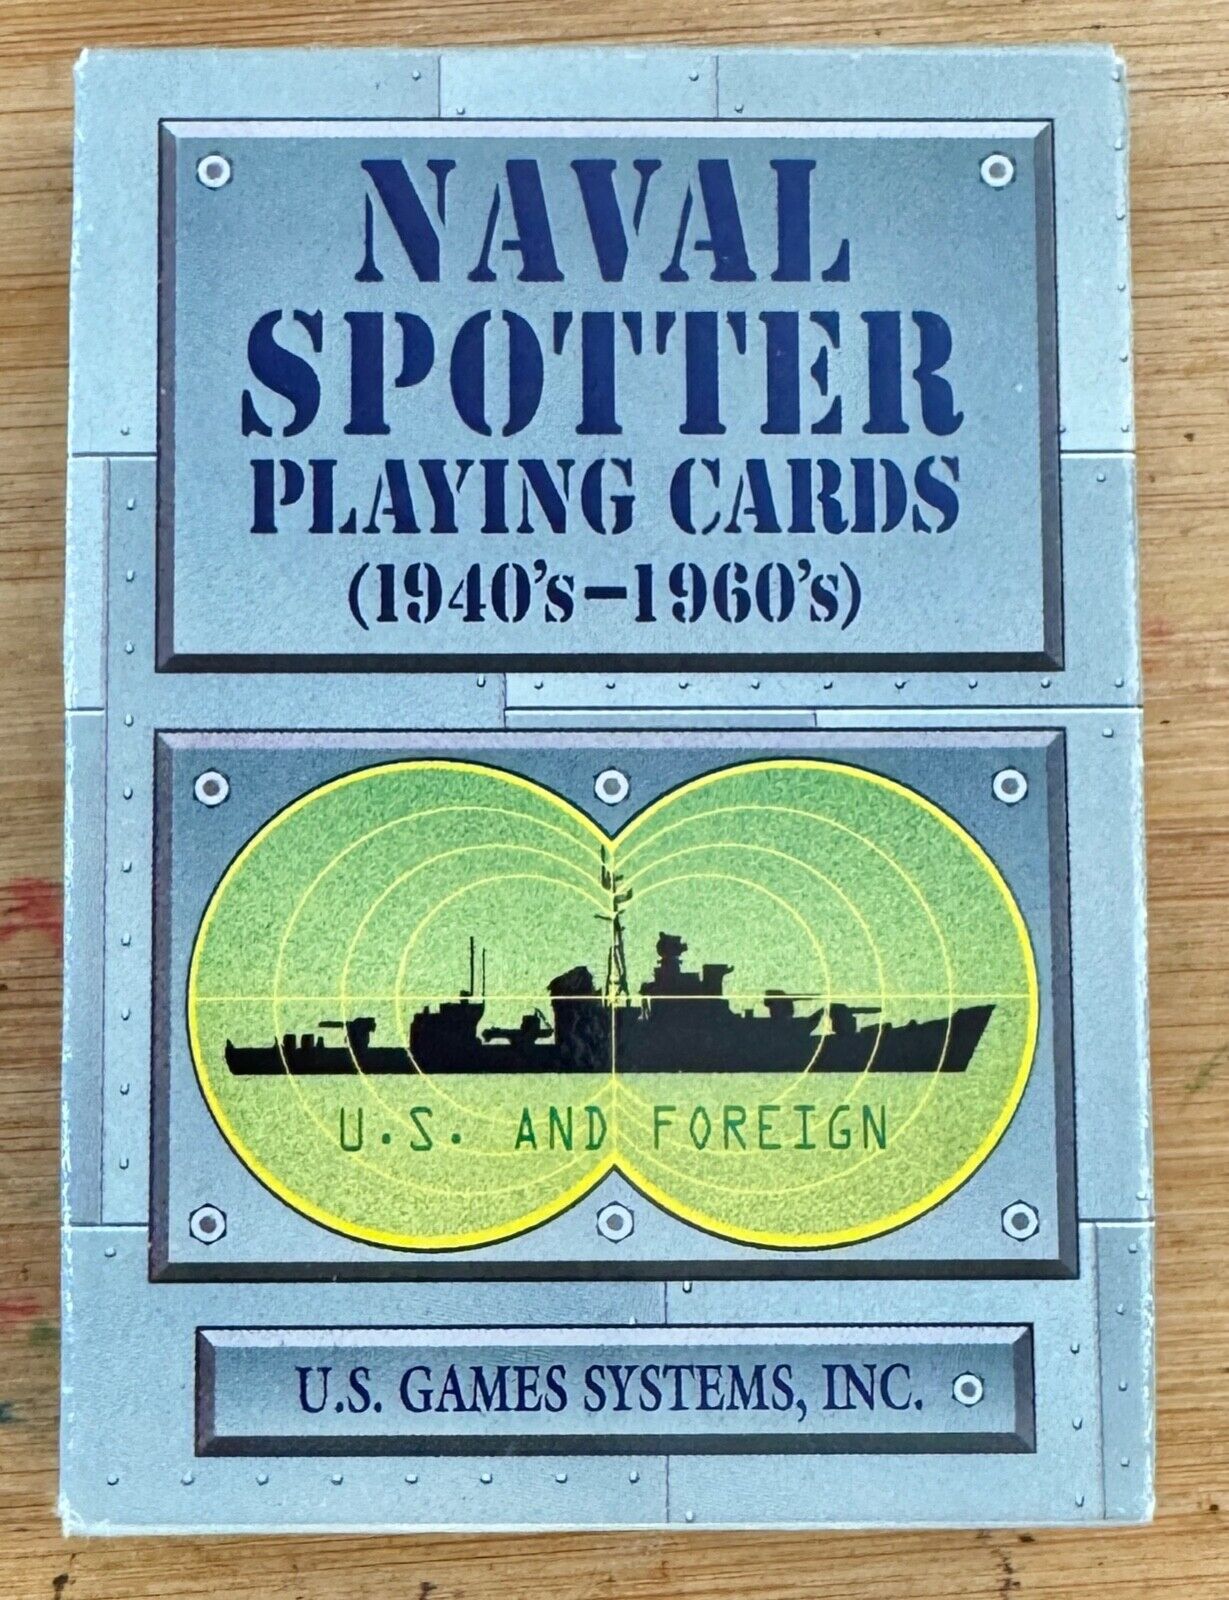 Vintage1996 NAVAL SPOTTER PlayingCards-Feature Silhouette US or Foreign Warships